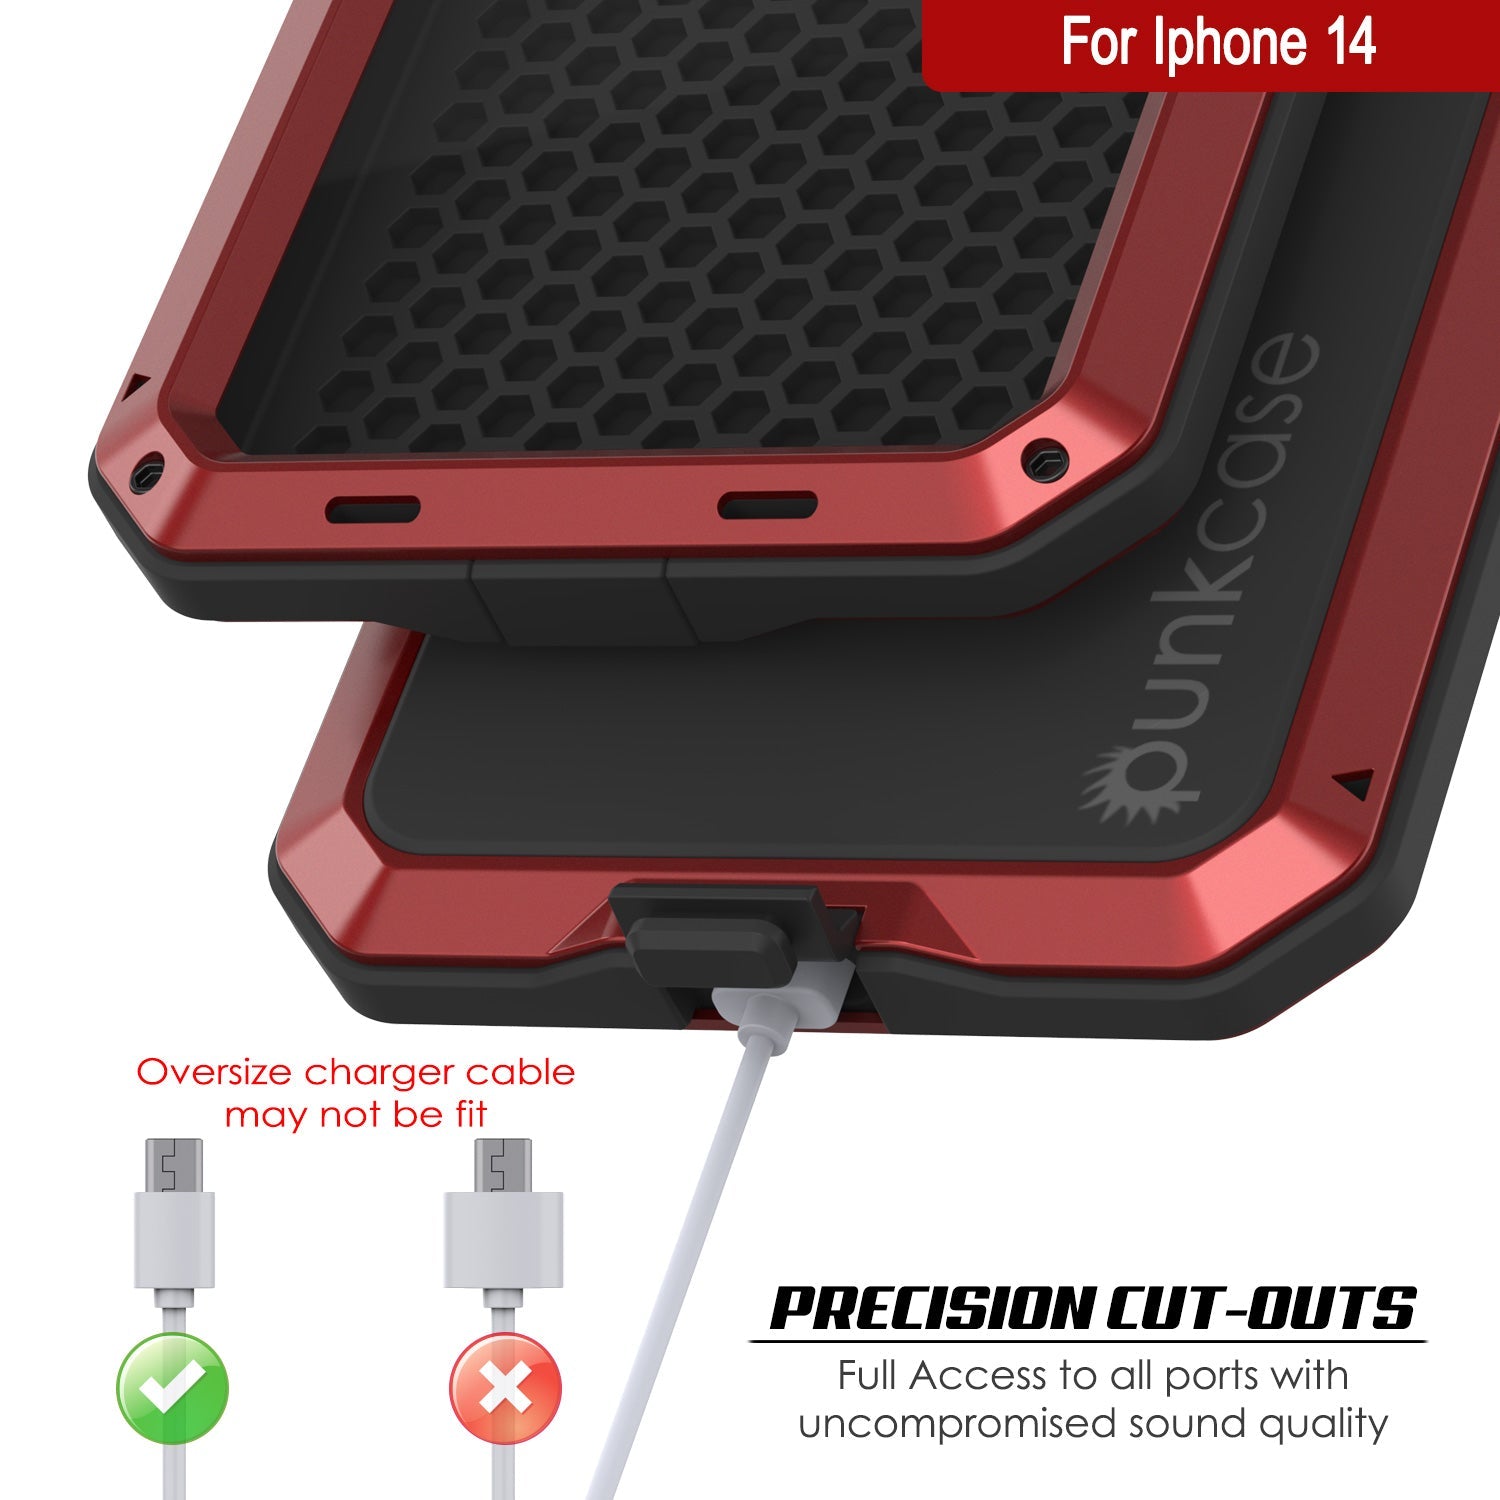 iPhone 14 Metal Case, Heavy Duty Military Grade Armor Cover [shock proof] Full Body Hard [Red]